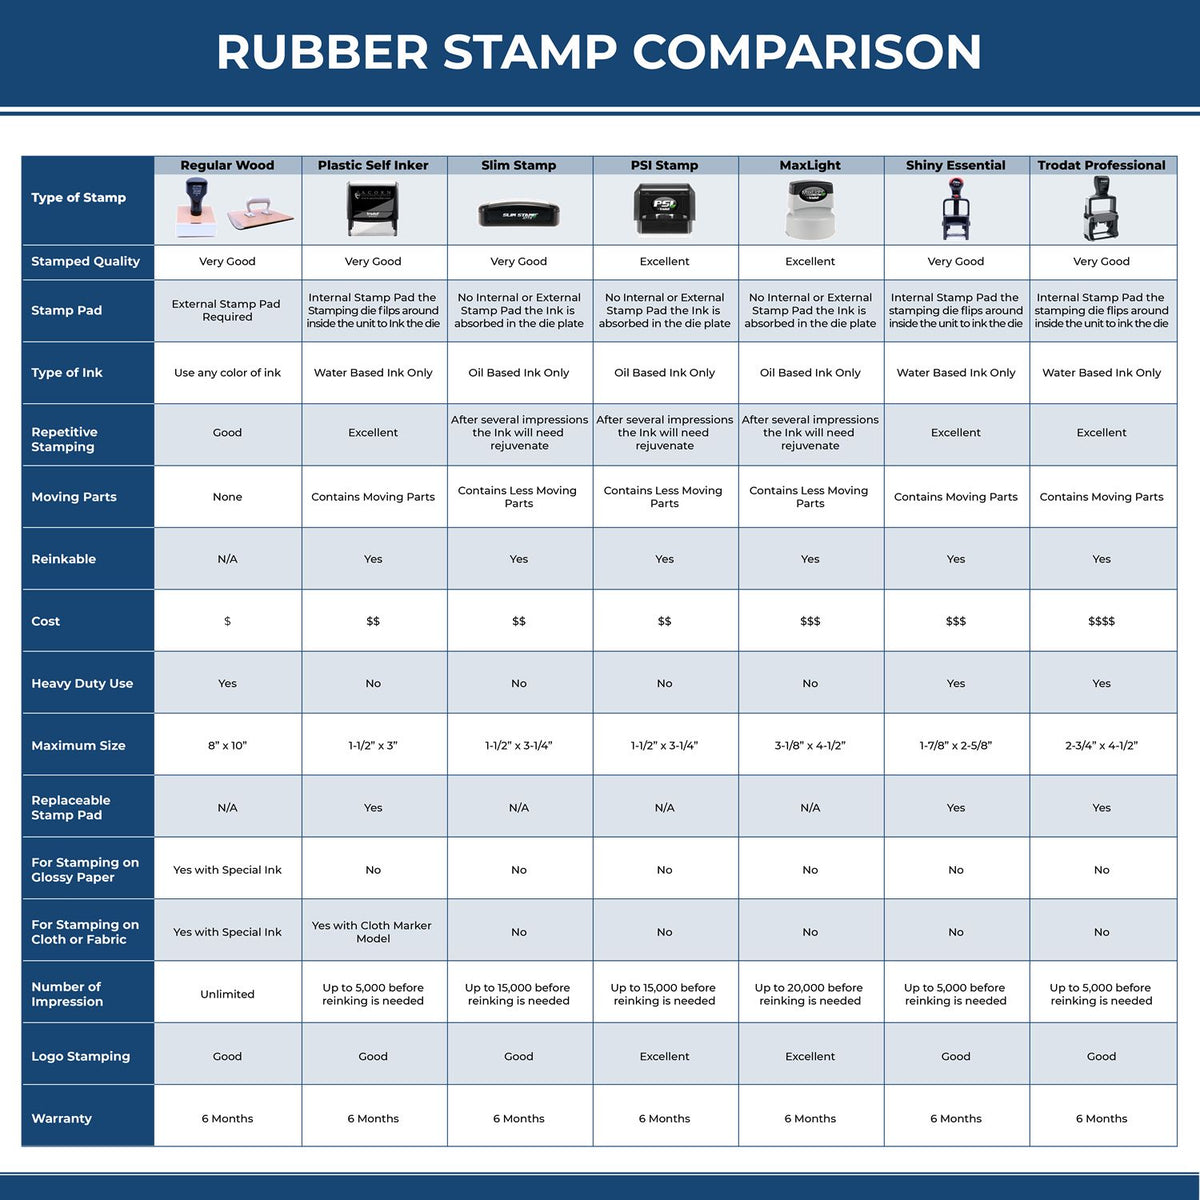 A comparison chart for the different types of mount models available for the Super Slim Nevada Notary Public Stamp.